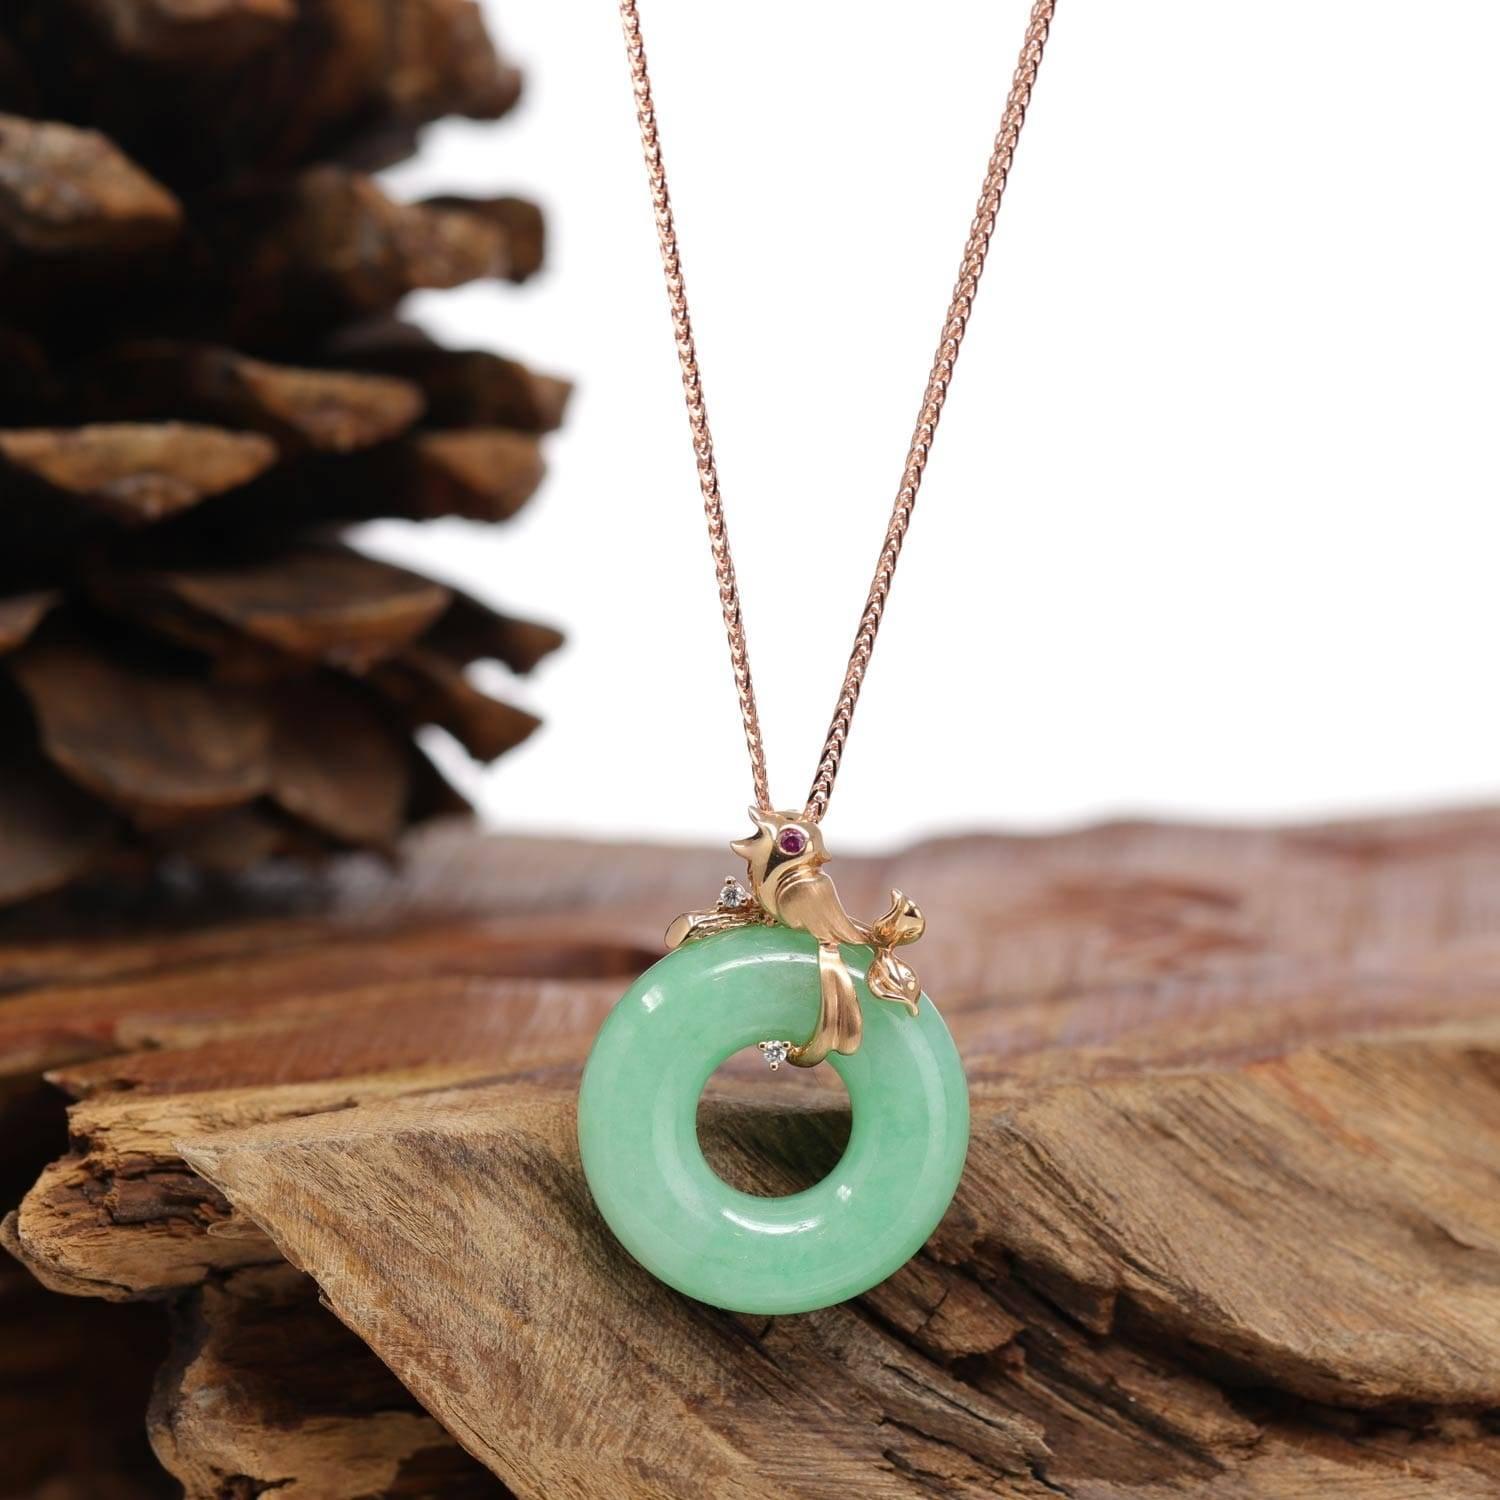 * DESIGN CONCEPT--- 18k Rose Gold & Genuine Burmese Jadeite Pendant Necklace With AA Ruby. This pendant is made with high-quality genuine jadeite with some green, The jadeite piece looks so clean and smooth without any clouds or cracks or any dirty